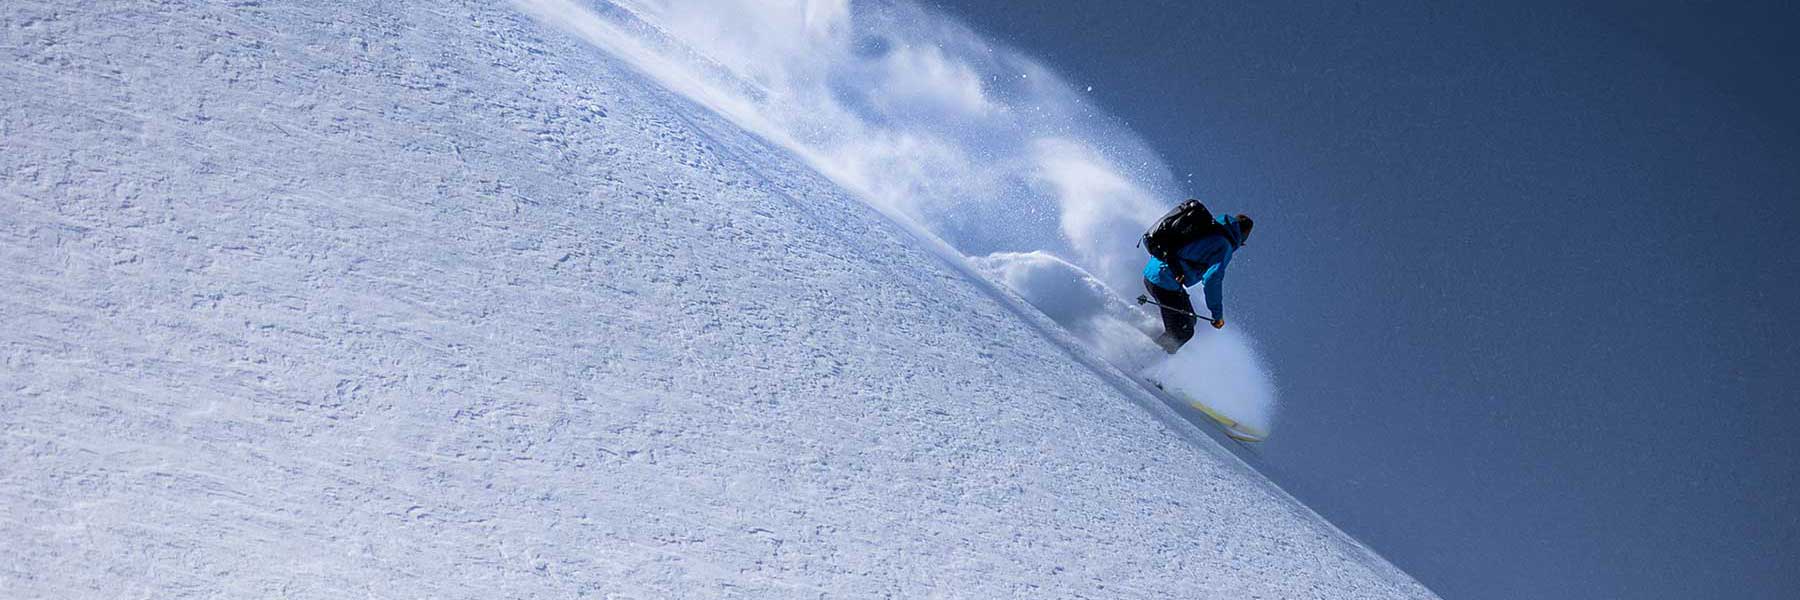 powder skiing in chile header